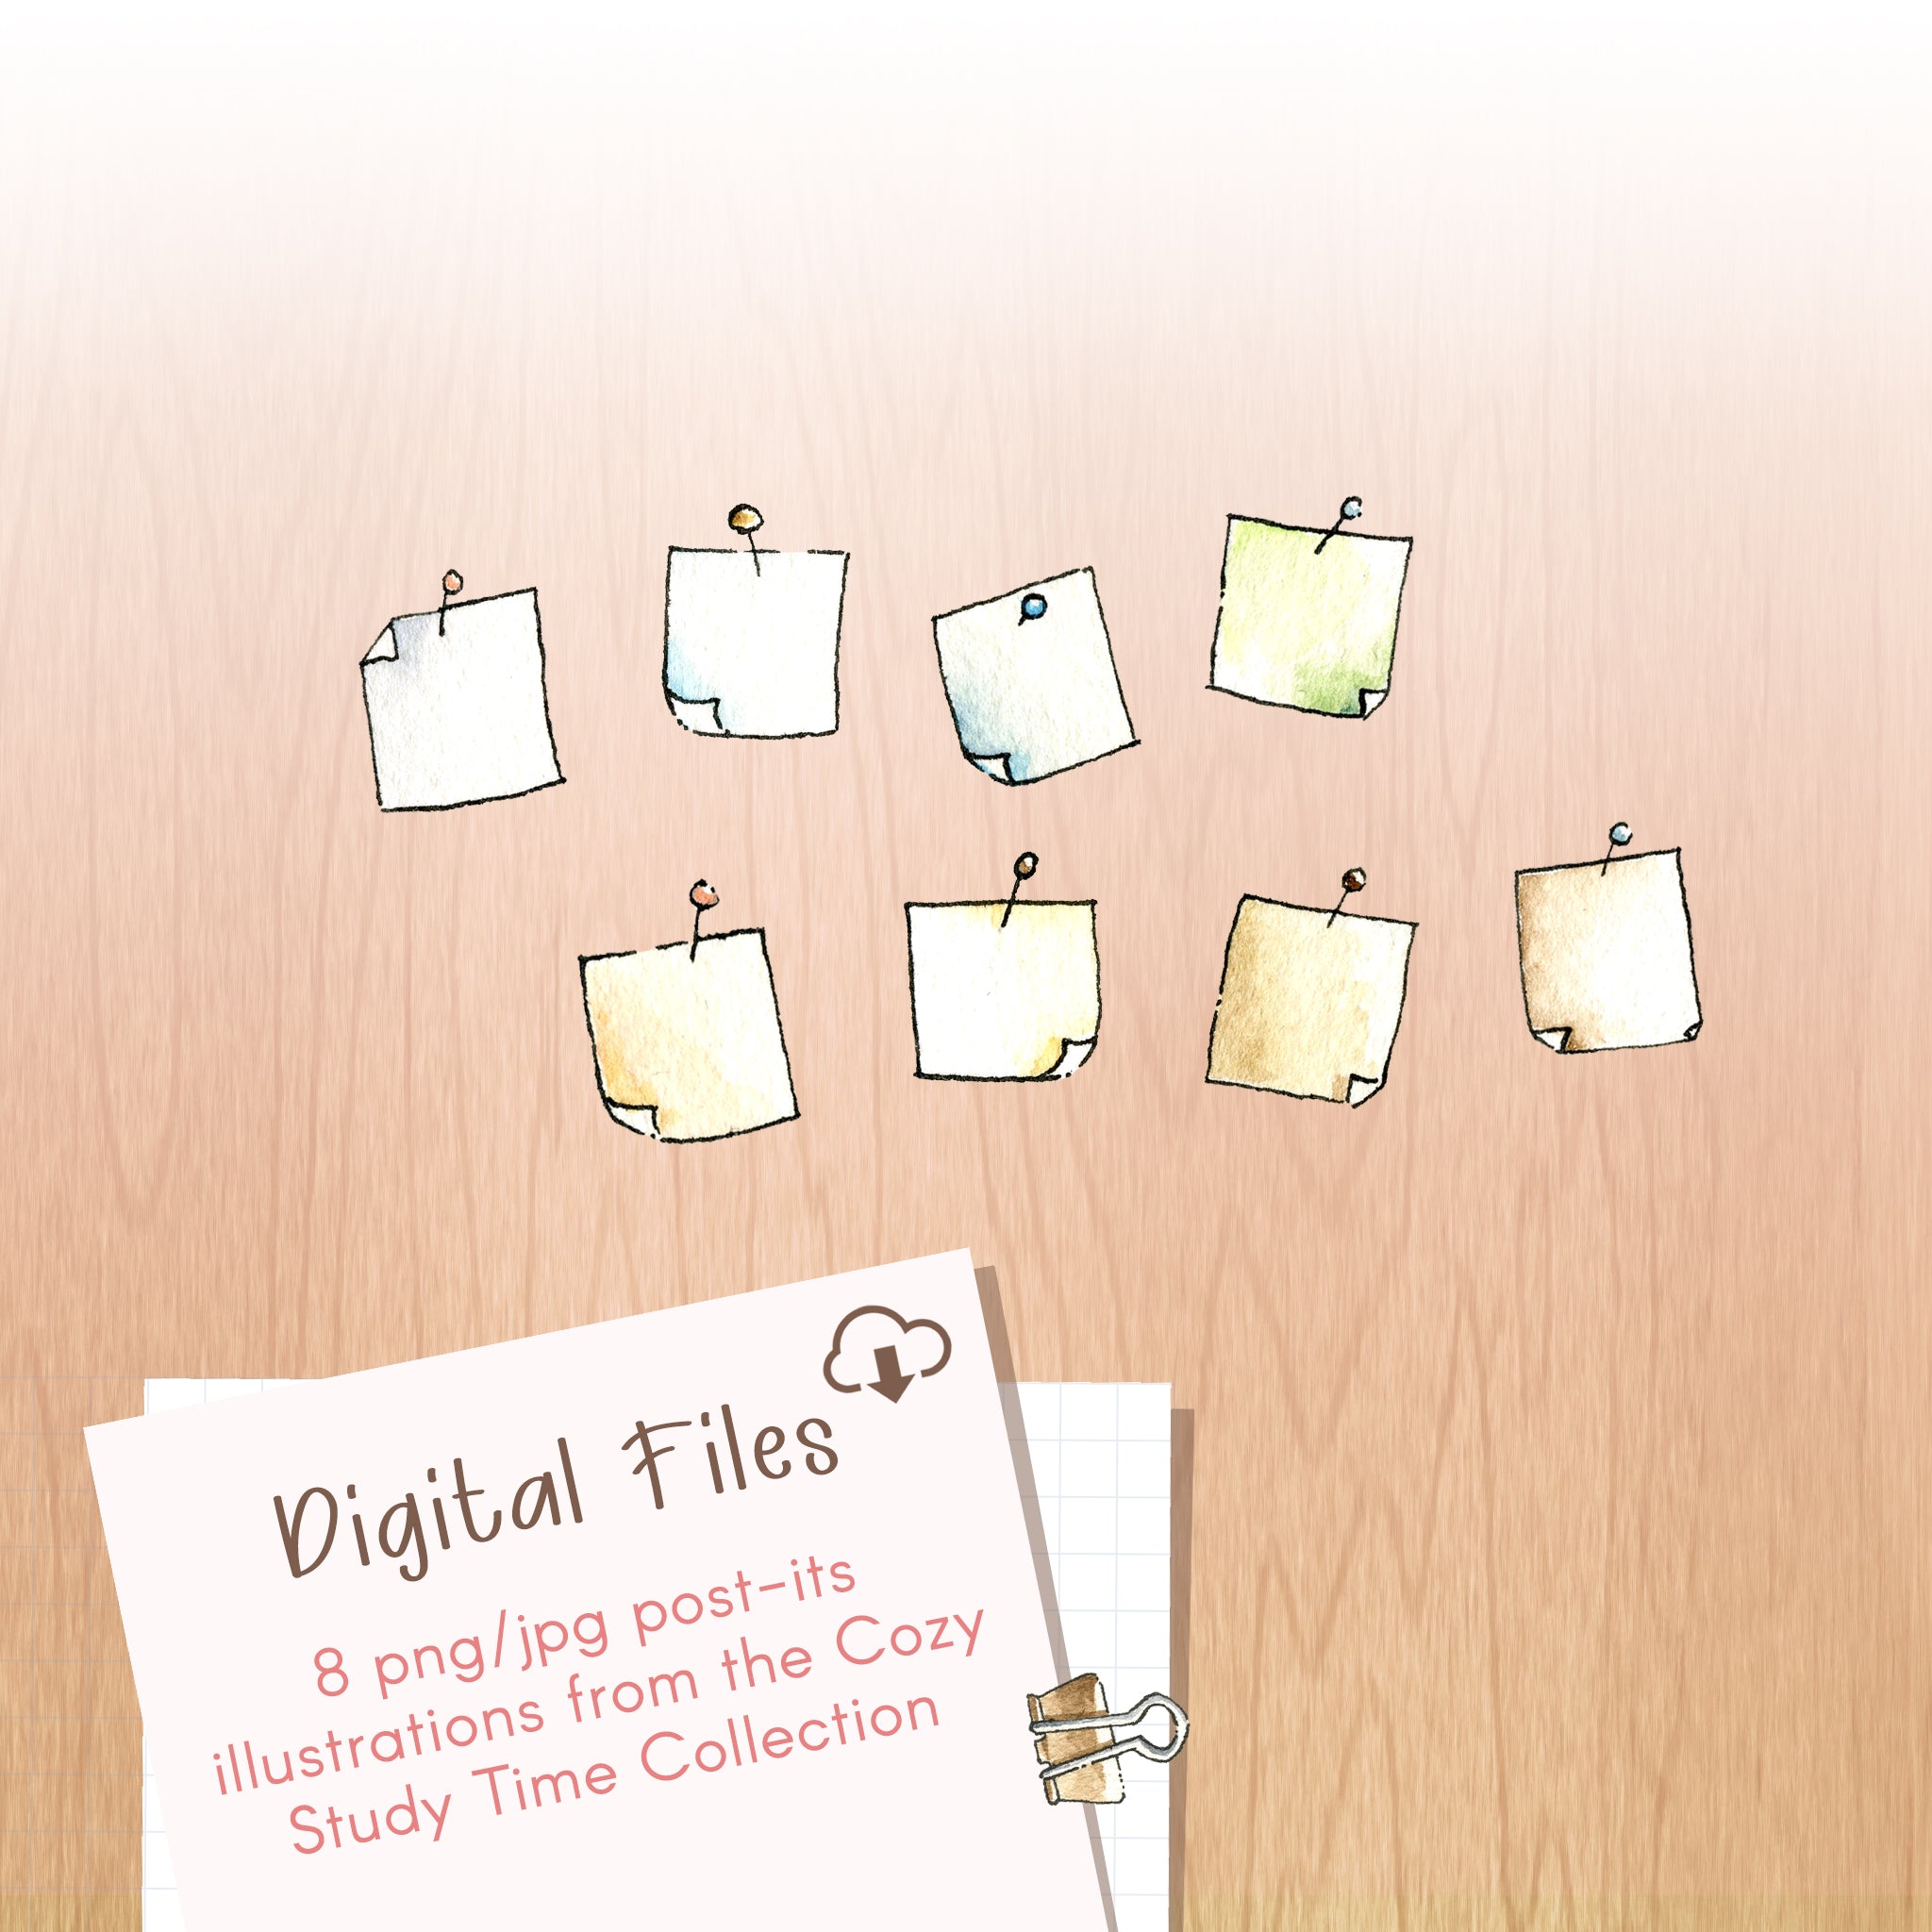 Cozy Study Time - Post-its Digital Files